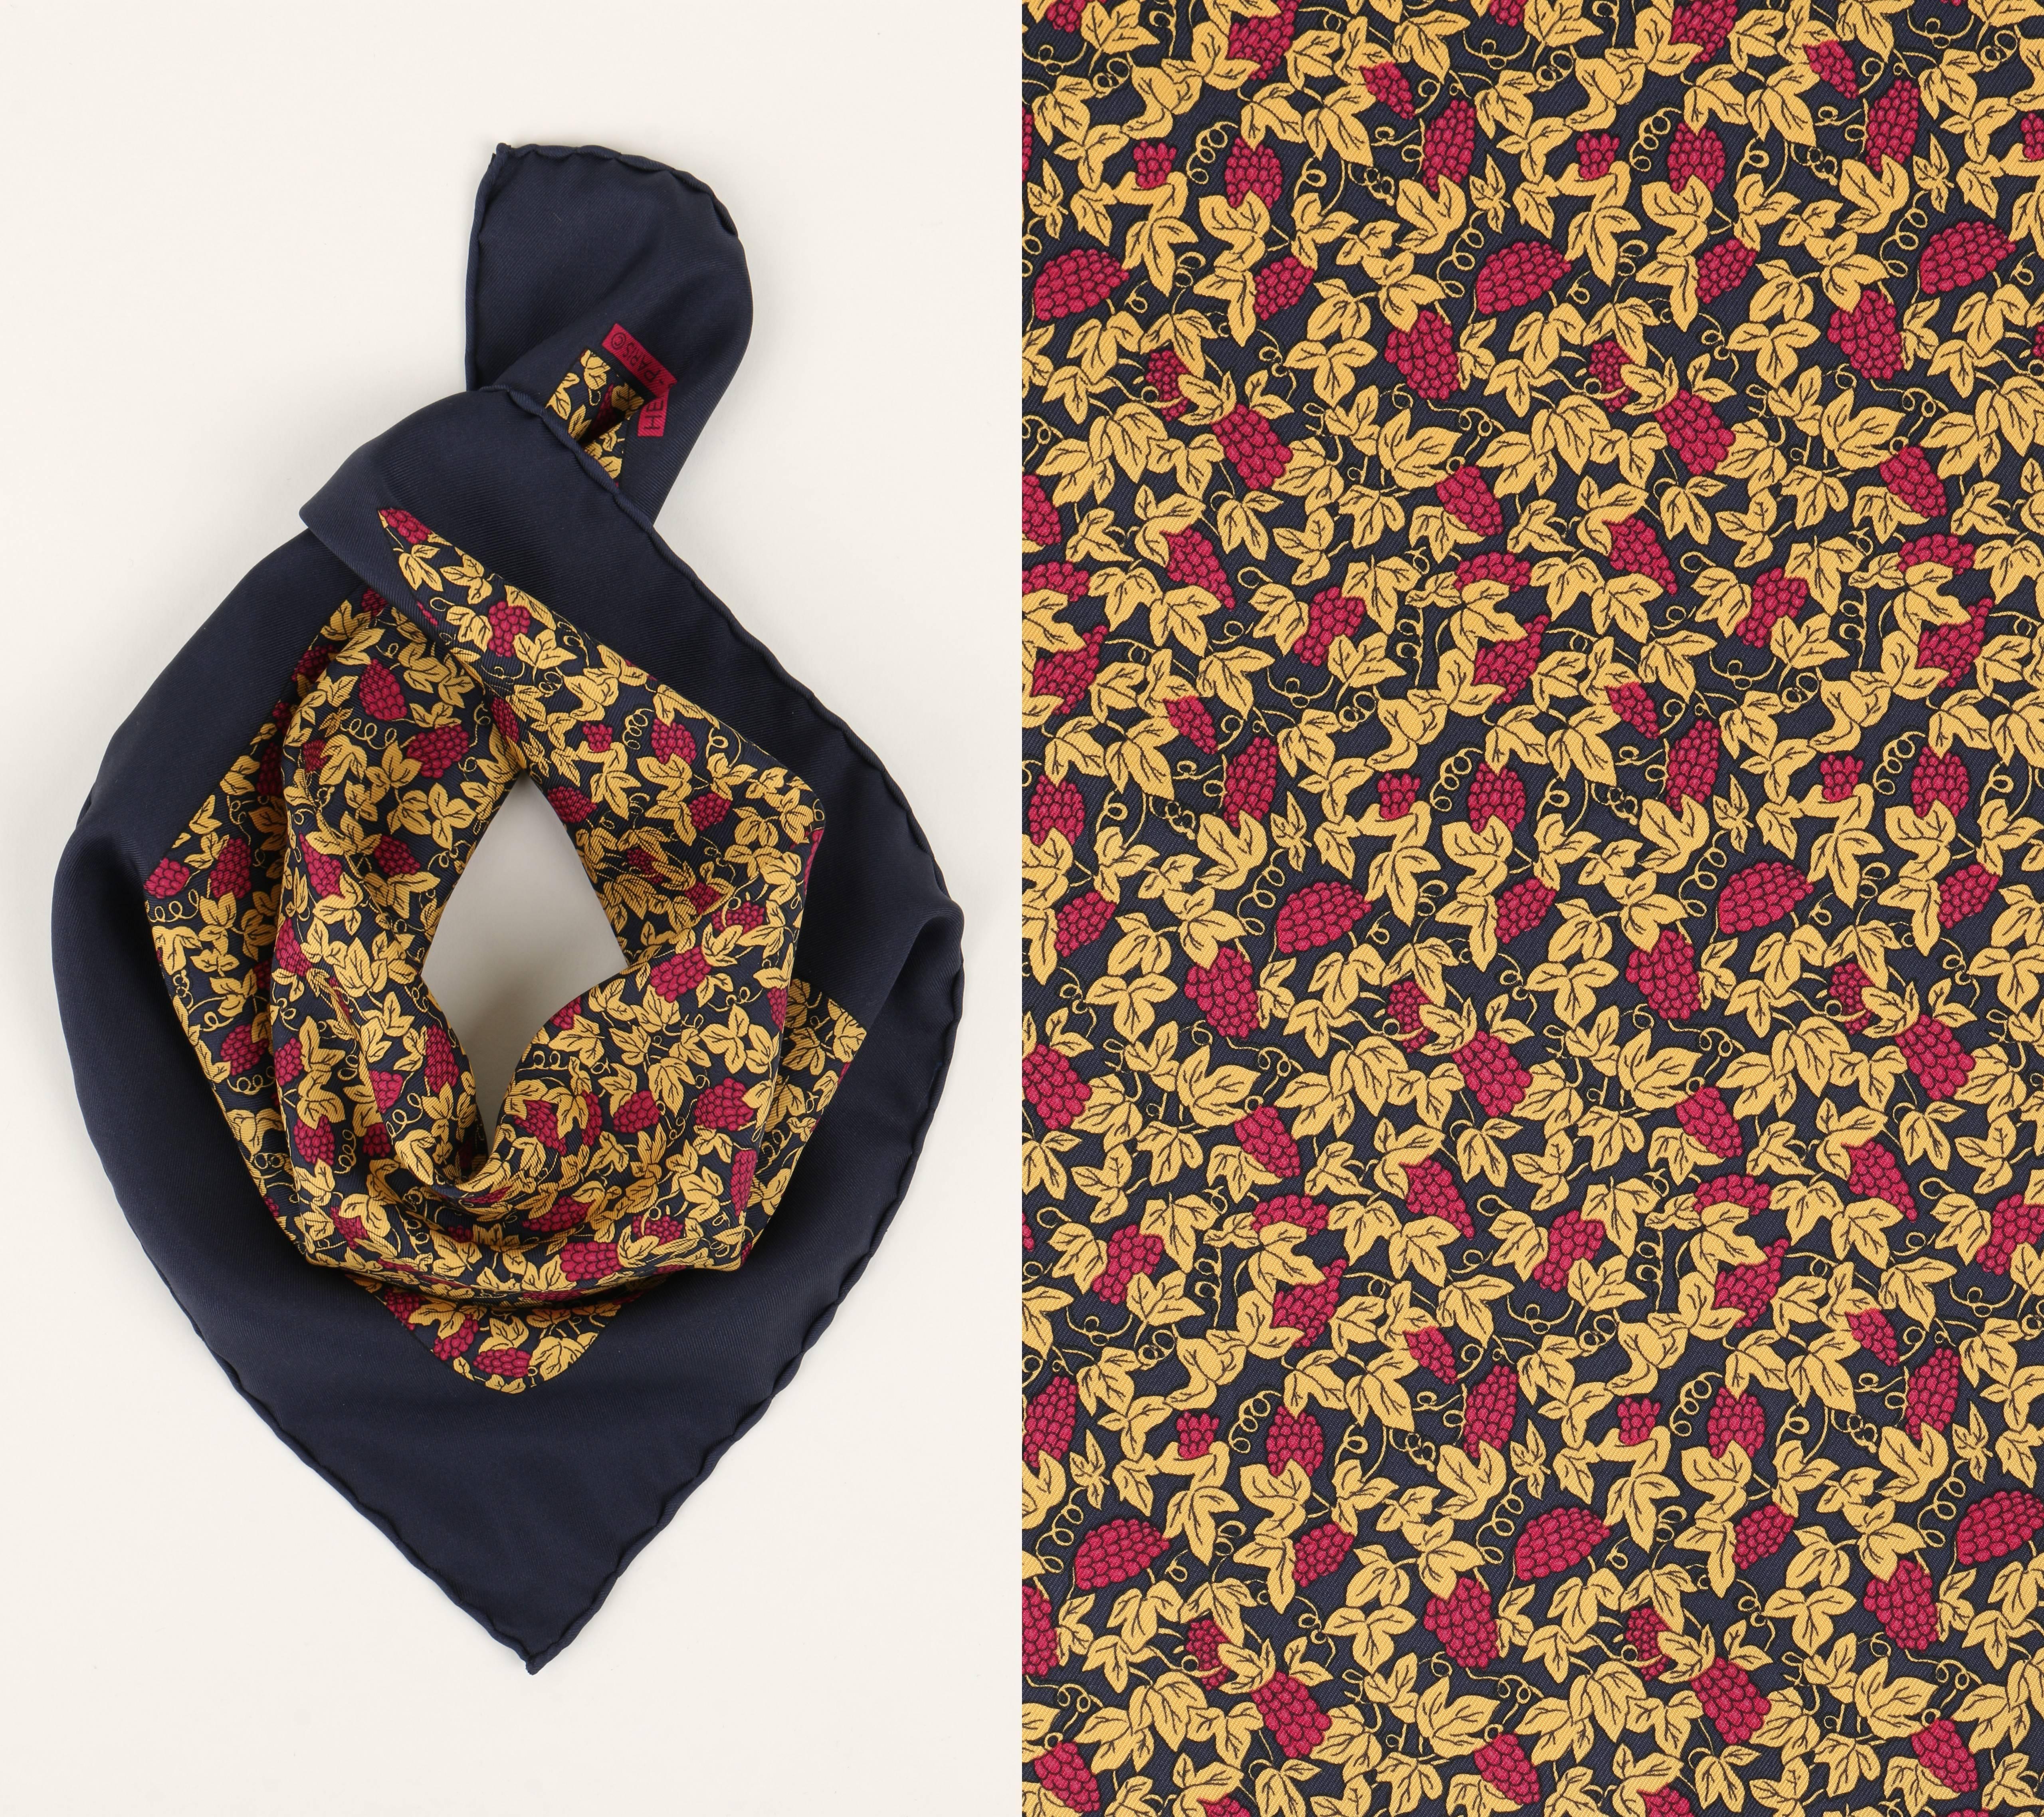 Vintage Hermes exclusively sold at Neiman Marcus navy blue silk pocket square scarf. Grapevine motif print. Hand rolled edges.  "Hermes-Paris" printed signature.  Marked Fabric Content: "100% Silk". 

Measurements:
Length: